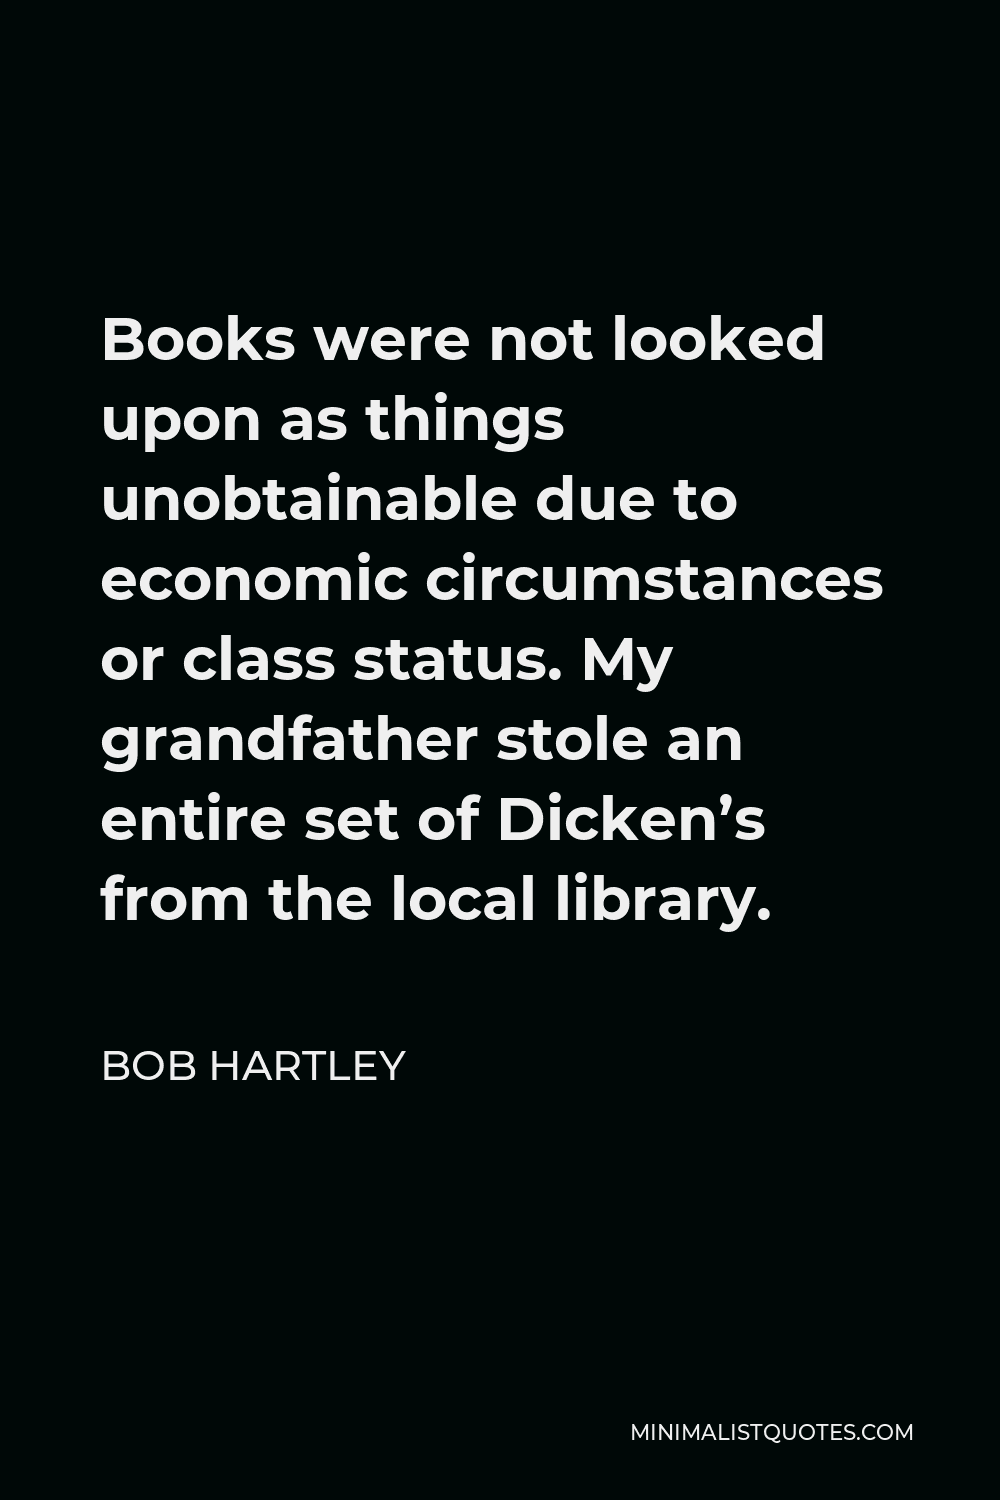 Bob Hartley Quote - Books were not looked upon as things unobtainable due to economic circumstances or class status. My grandfather stole an entire set of Dicken’s from the local library.